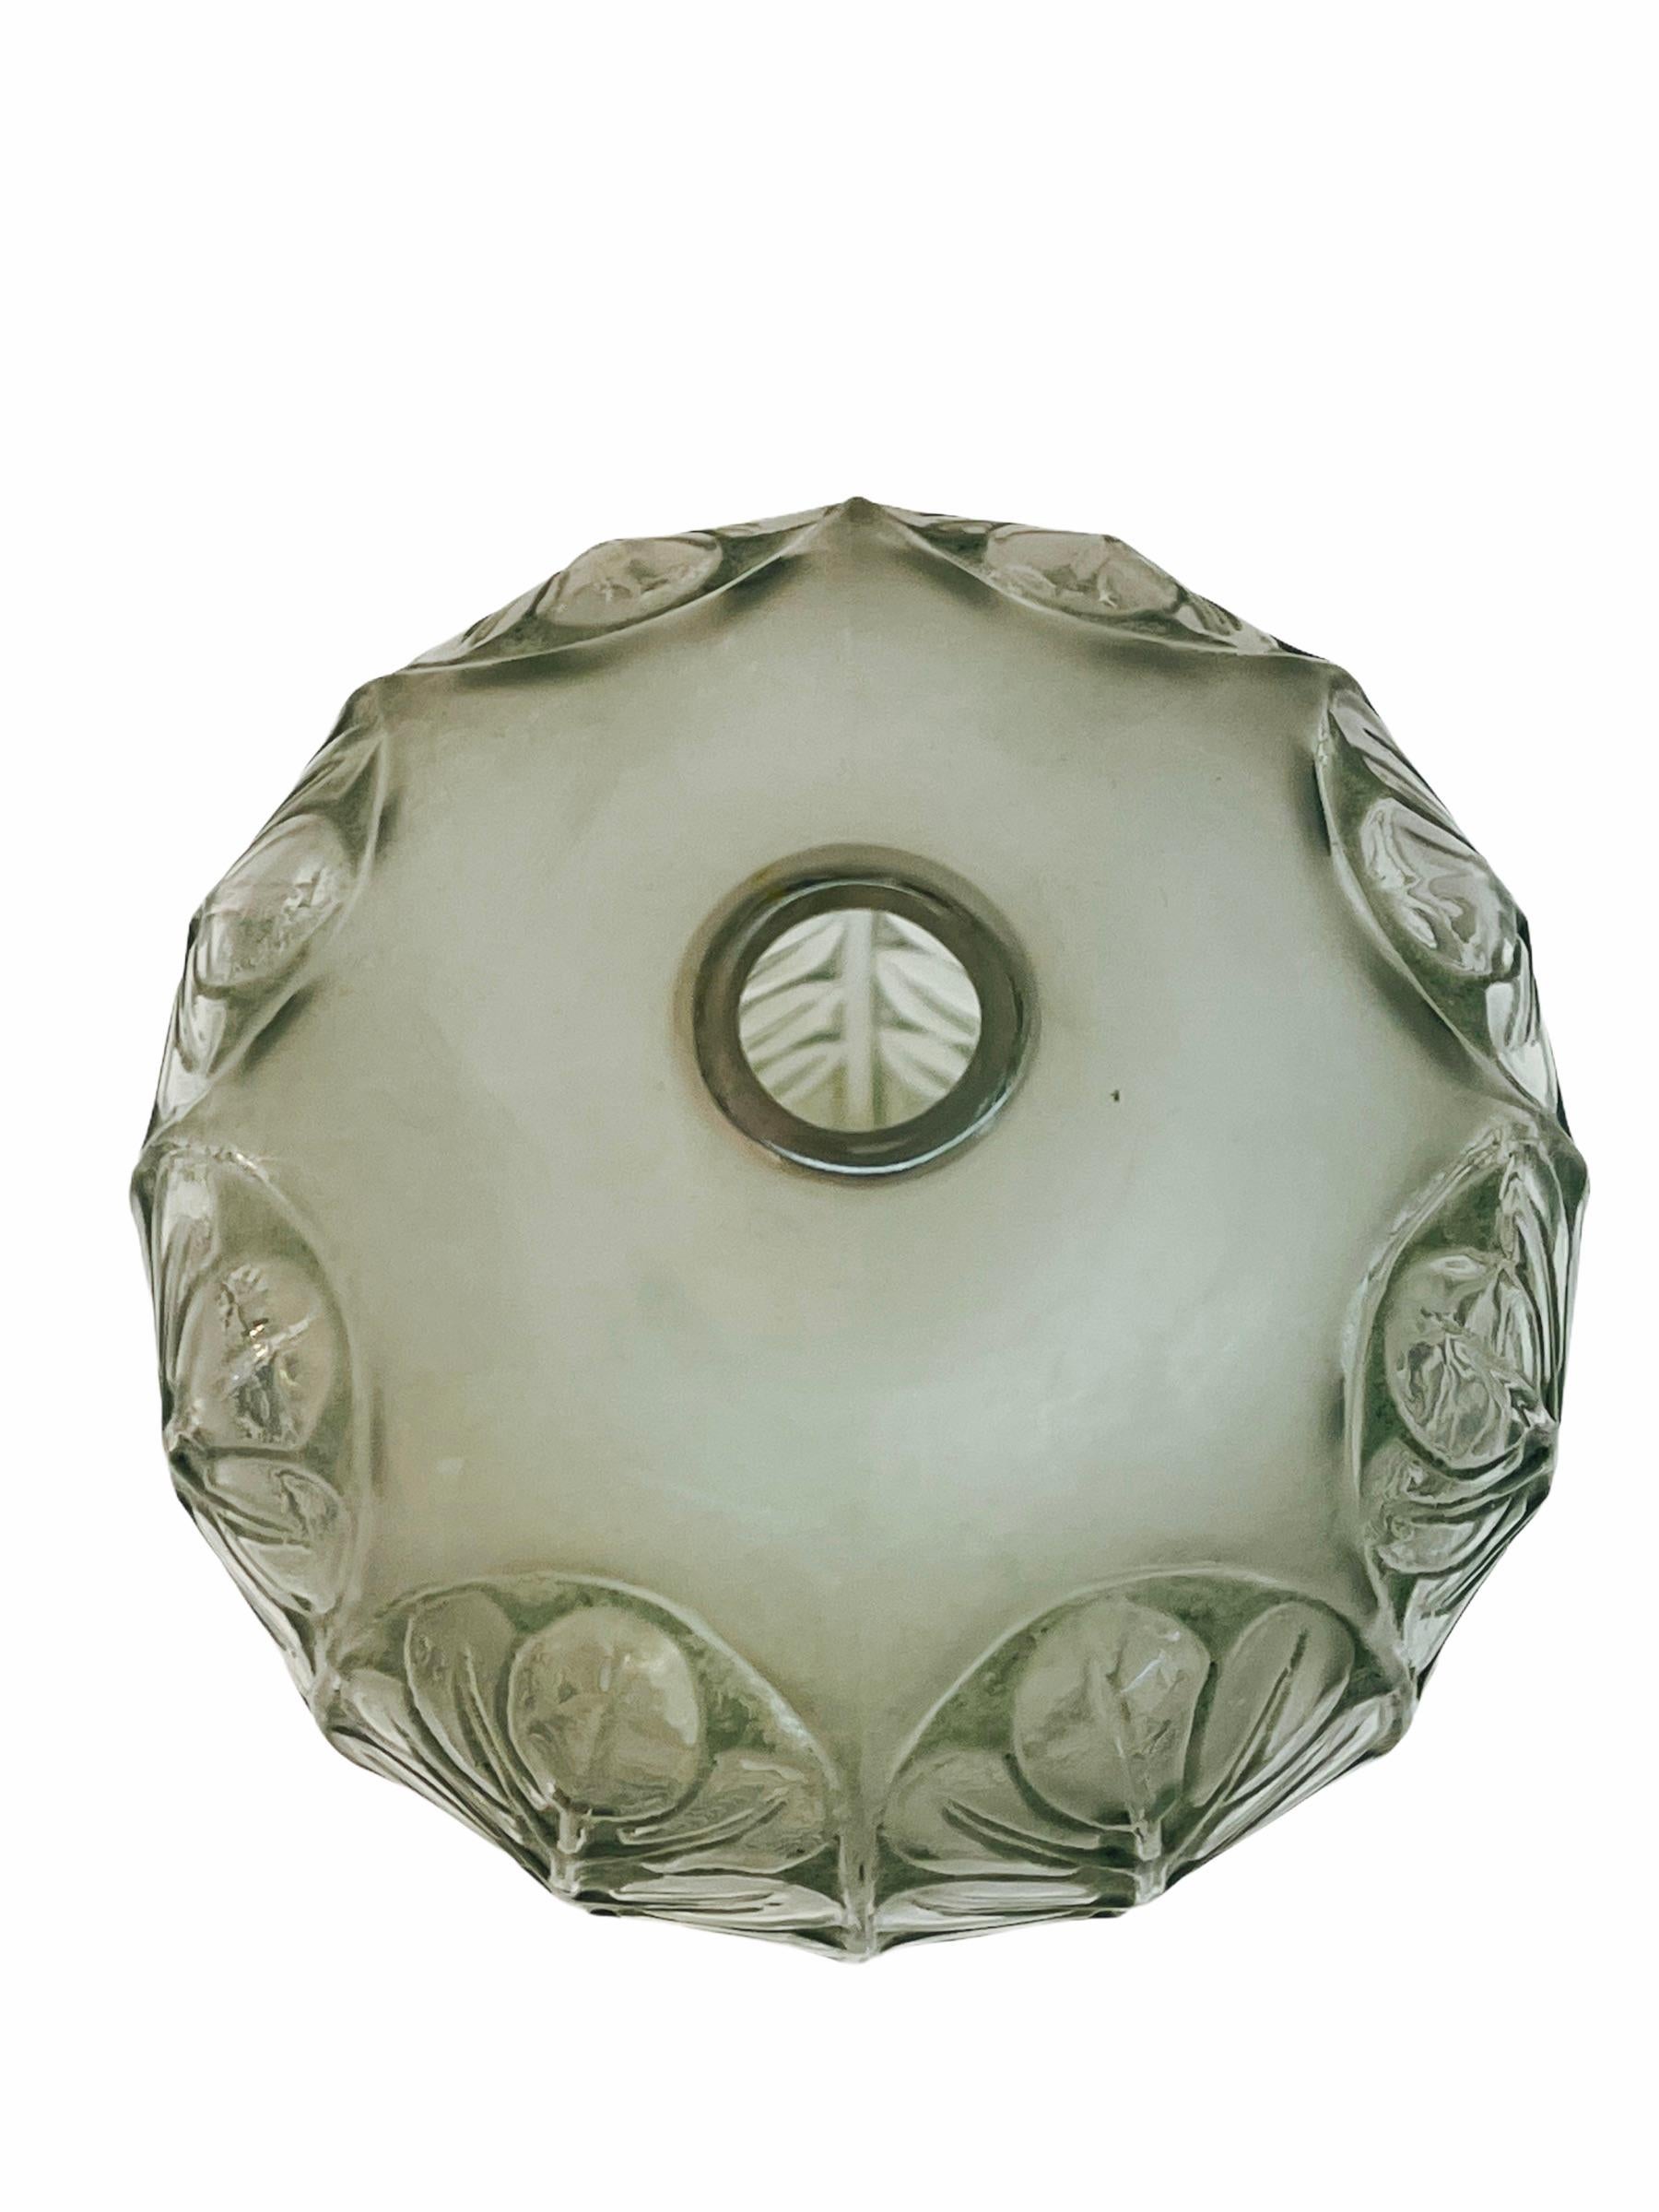 Molded 1924 René Lalique Tournai Vase in Frosted Glass with Green Patina